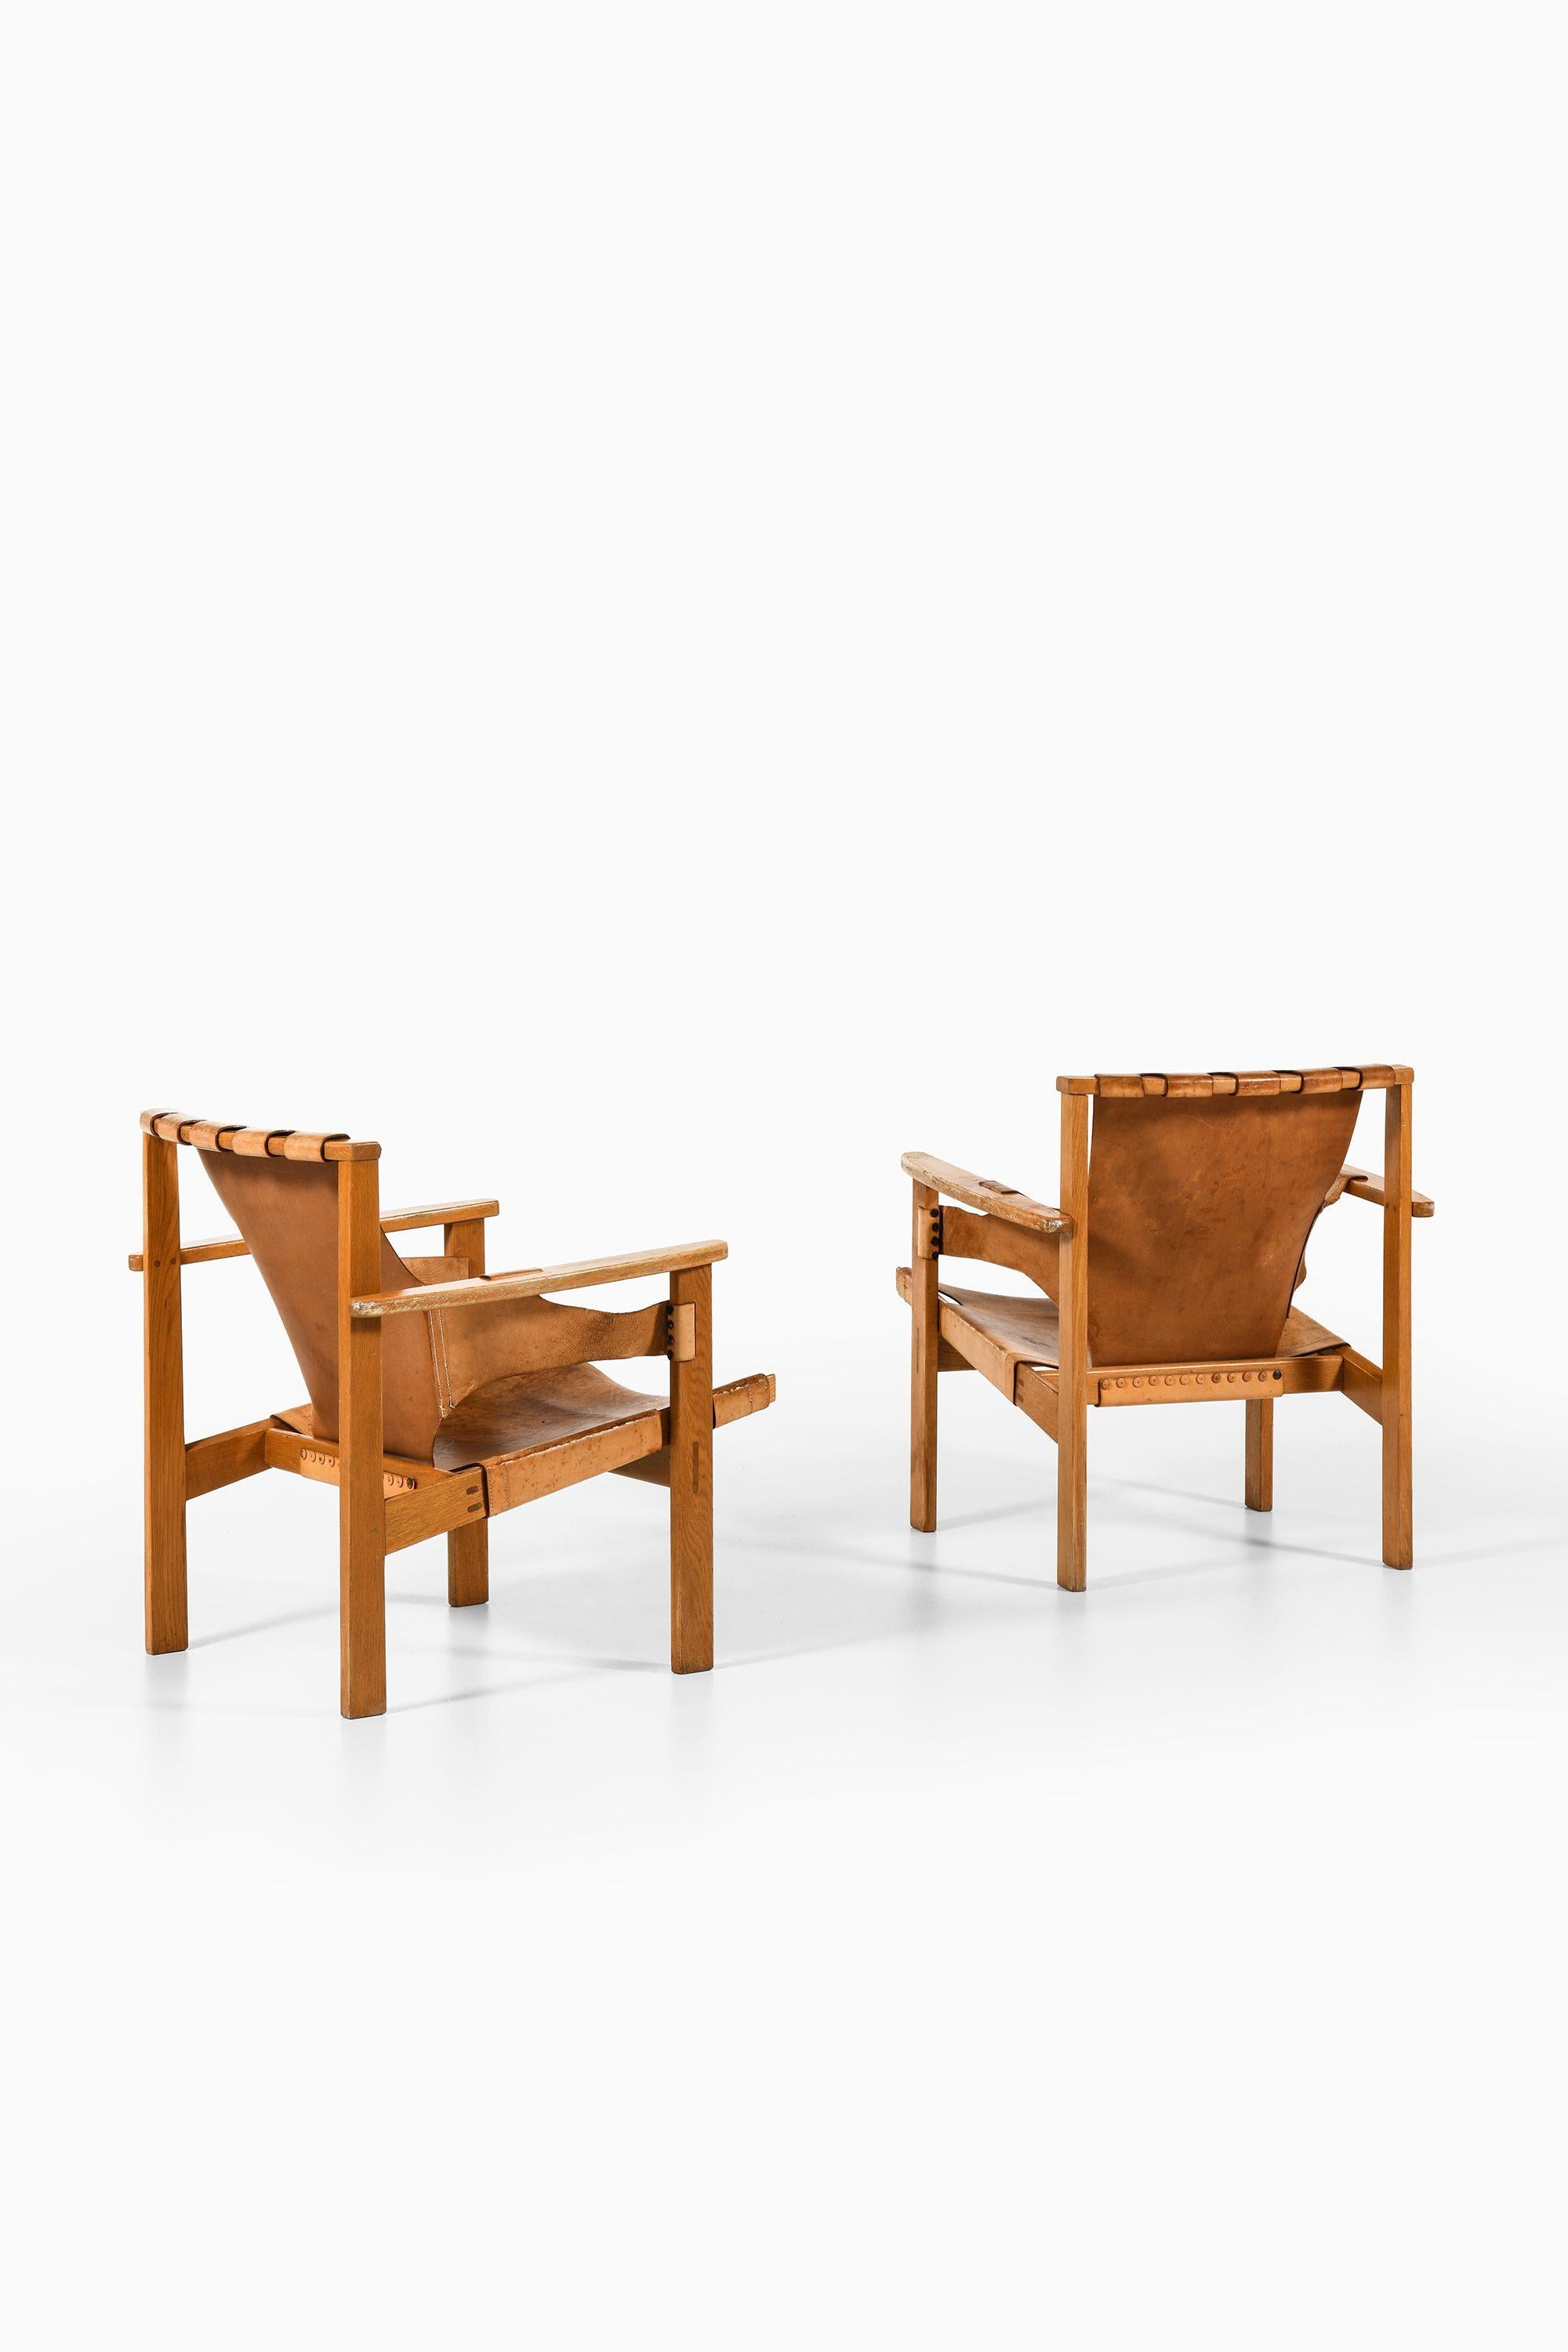 Pair of Trienna Easy Chairs in Oak & Original Leather by Carl-Axel Acking, 1957 In Good Condition In Limhamn, Skåne län